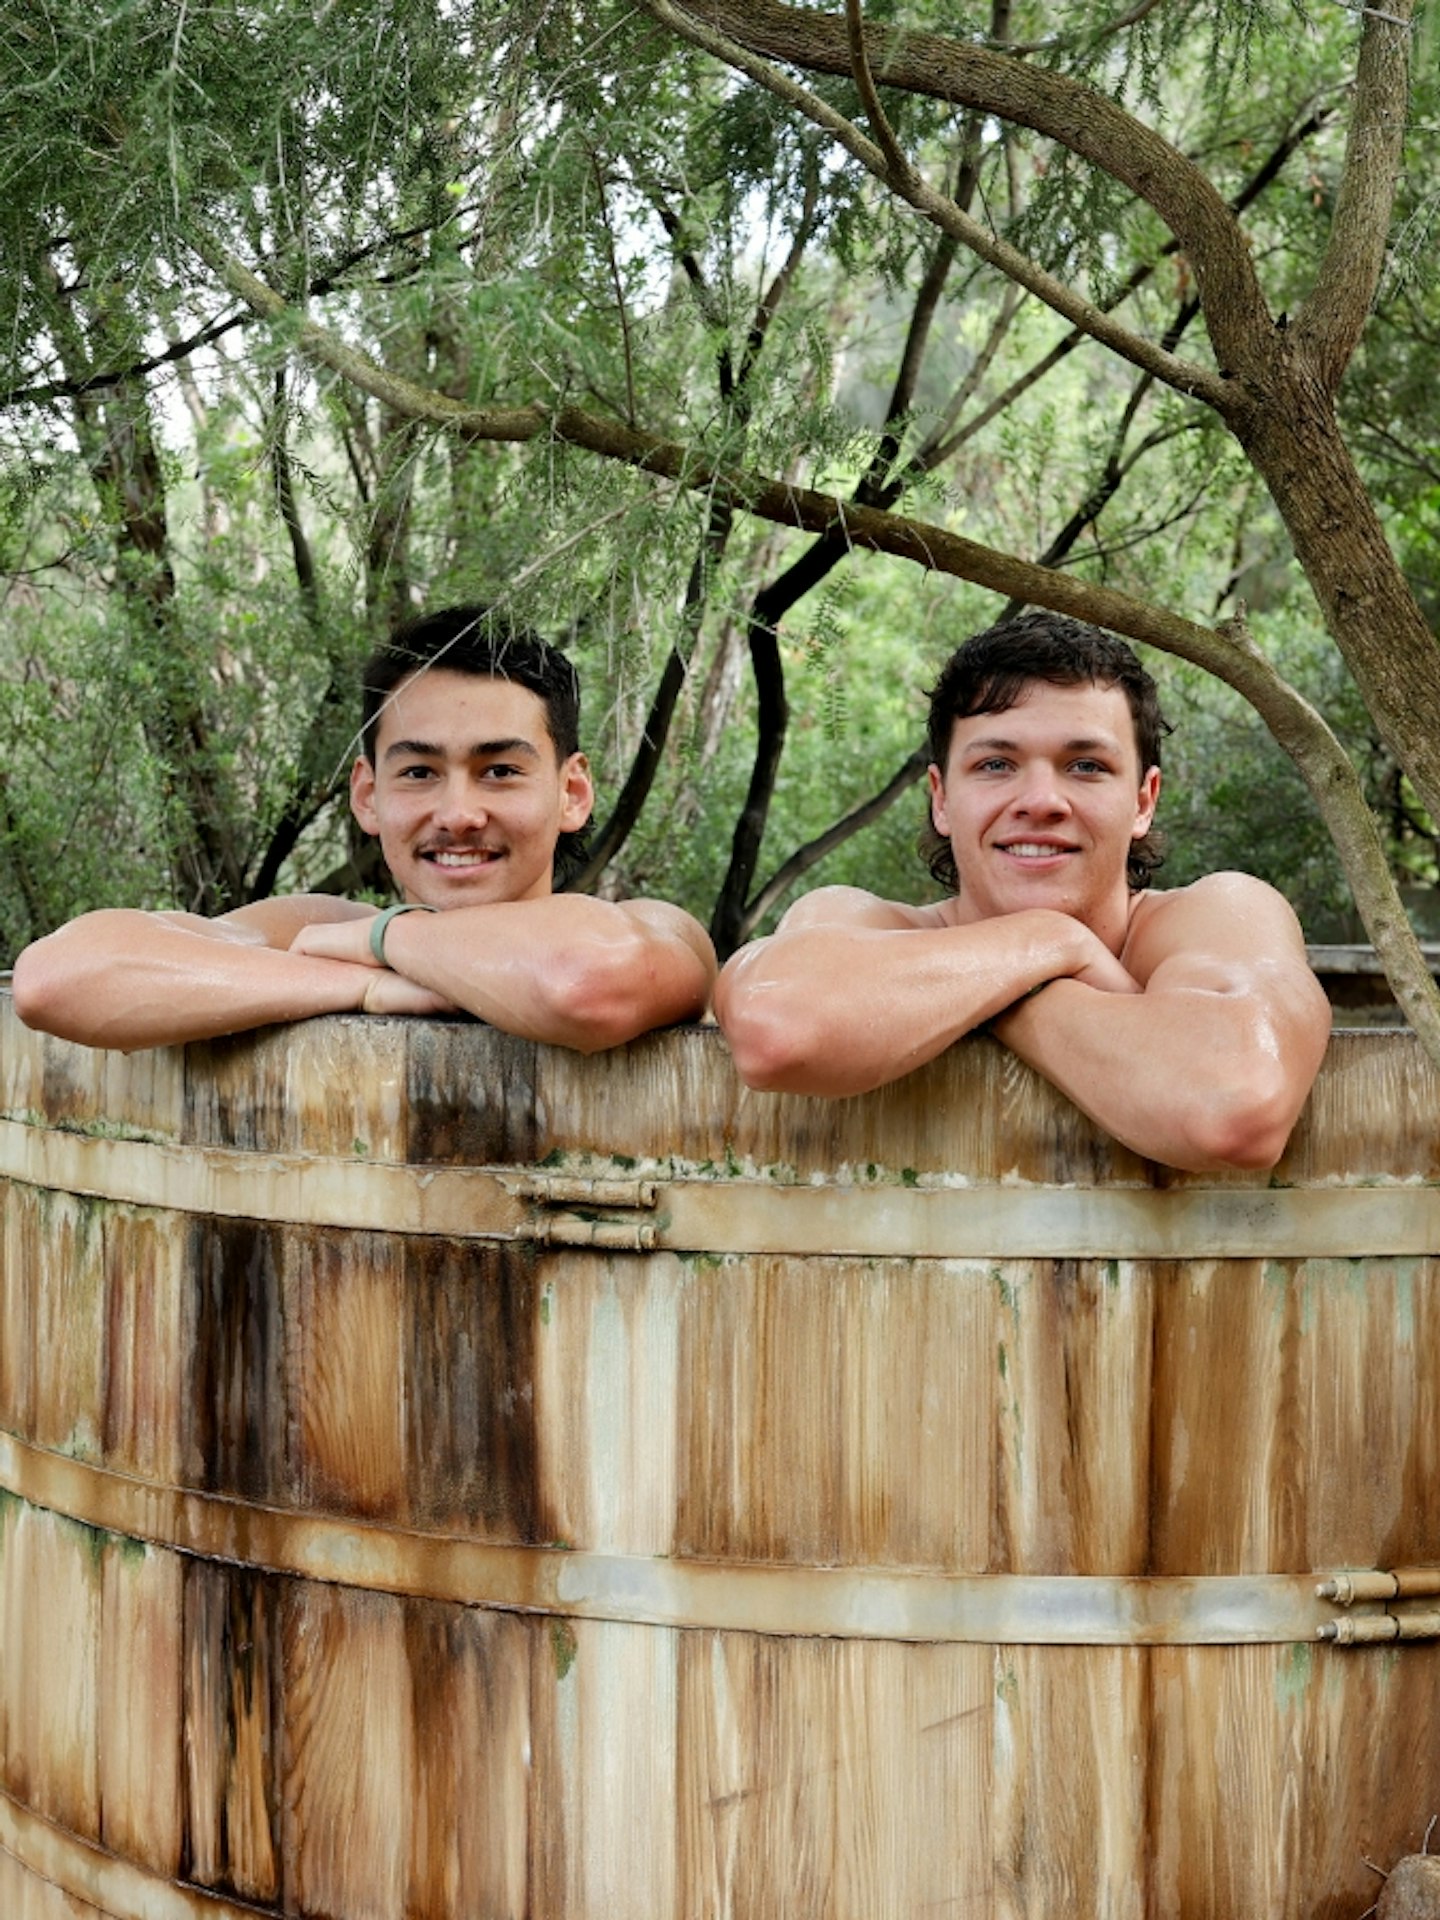 Two young men geothermal bathing in a large barrel